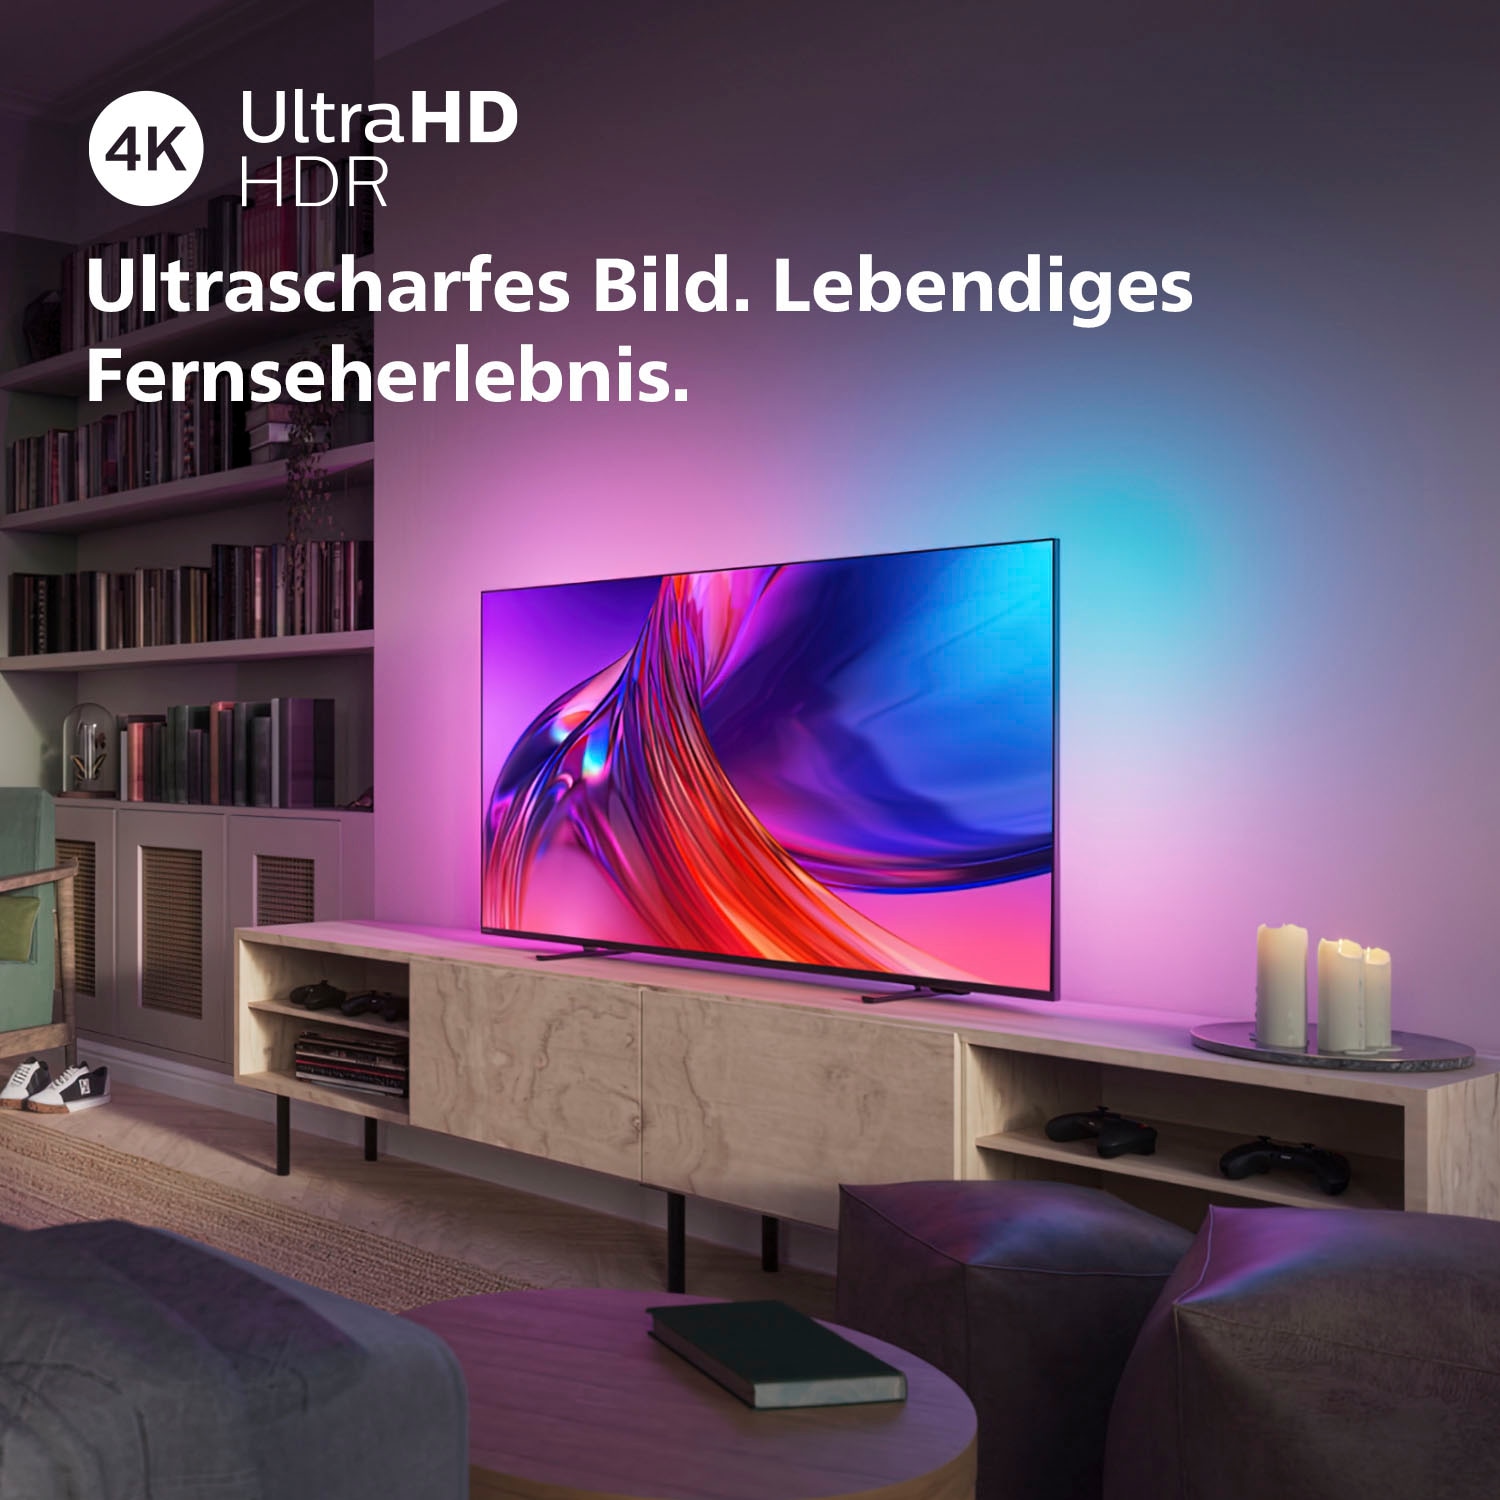 TV-Smart-TV, Ultra cm/50 126 LED-Fernseher Ambilight Zoll, 3-seitiges Android bei Philips OTTO TV-Google »50PUS8548/12«, HD, 4K